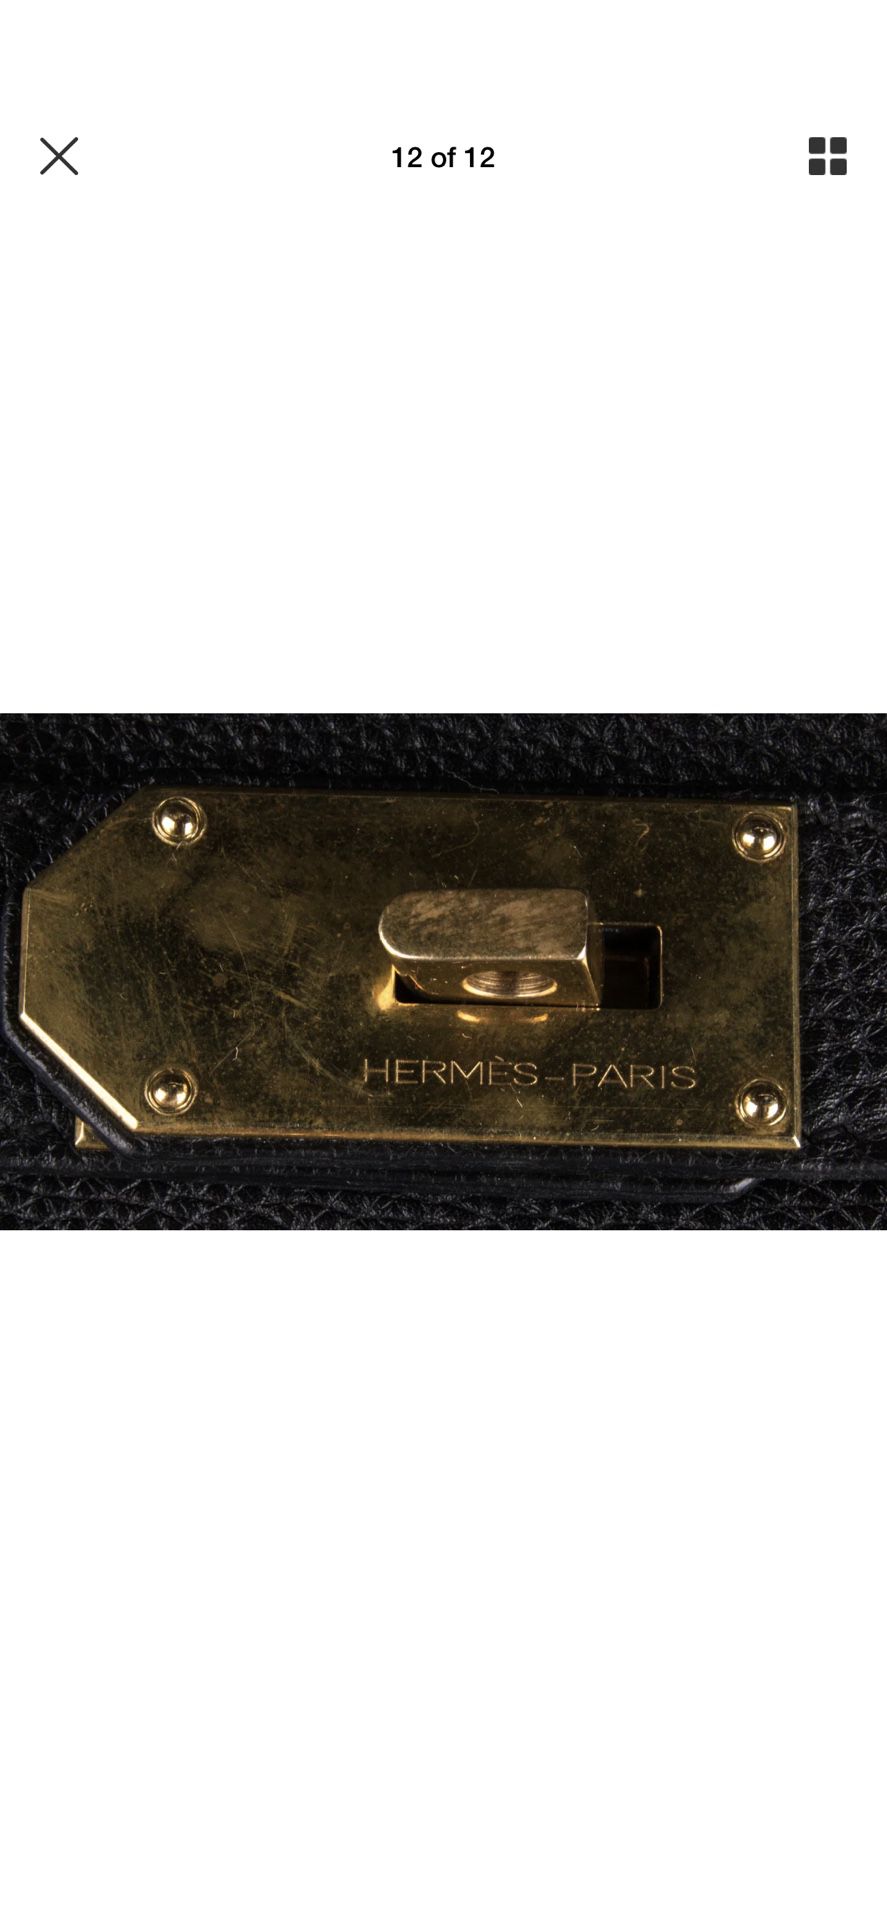 Authentic Hermès HAC Birkin Clemence leather 50 Men's Travel Bag for Sale  in Jersey City, NJ - OfferUp